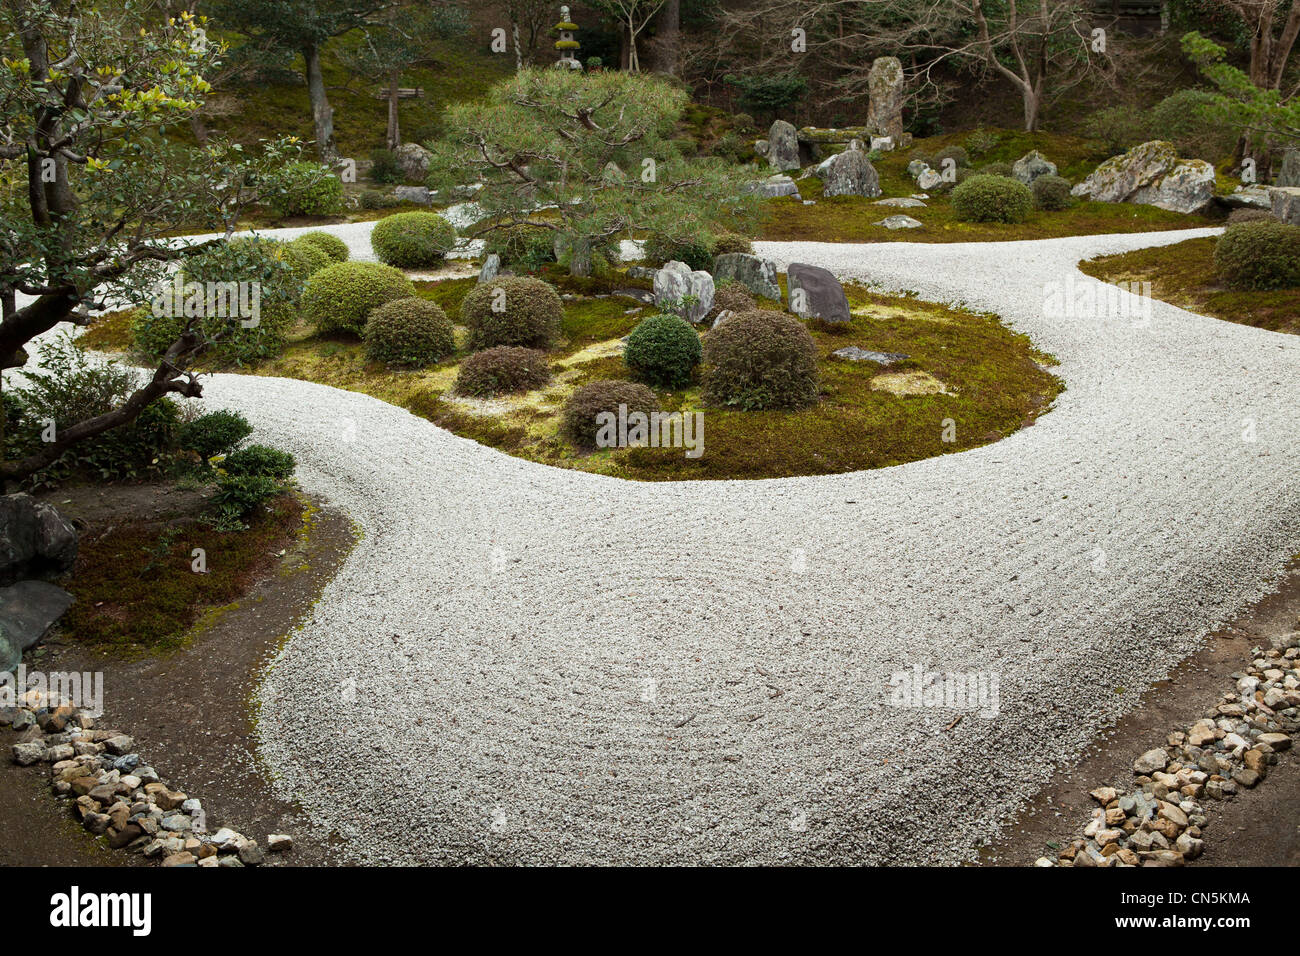 Manshu-in is a Karesansui zen garden containing a Pinus pentaphylla tree, now about 400 years old, set within an 'island'. Stock Photo